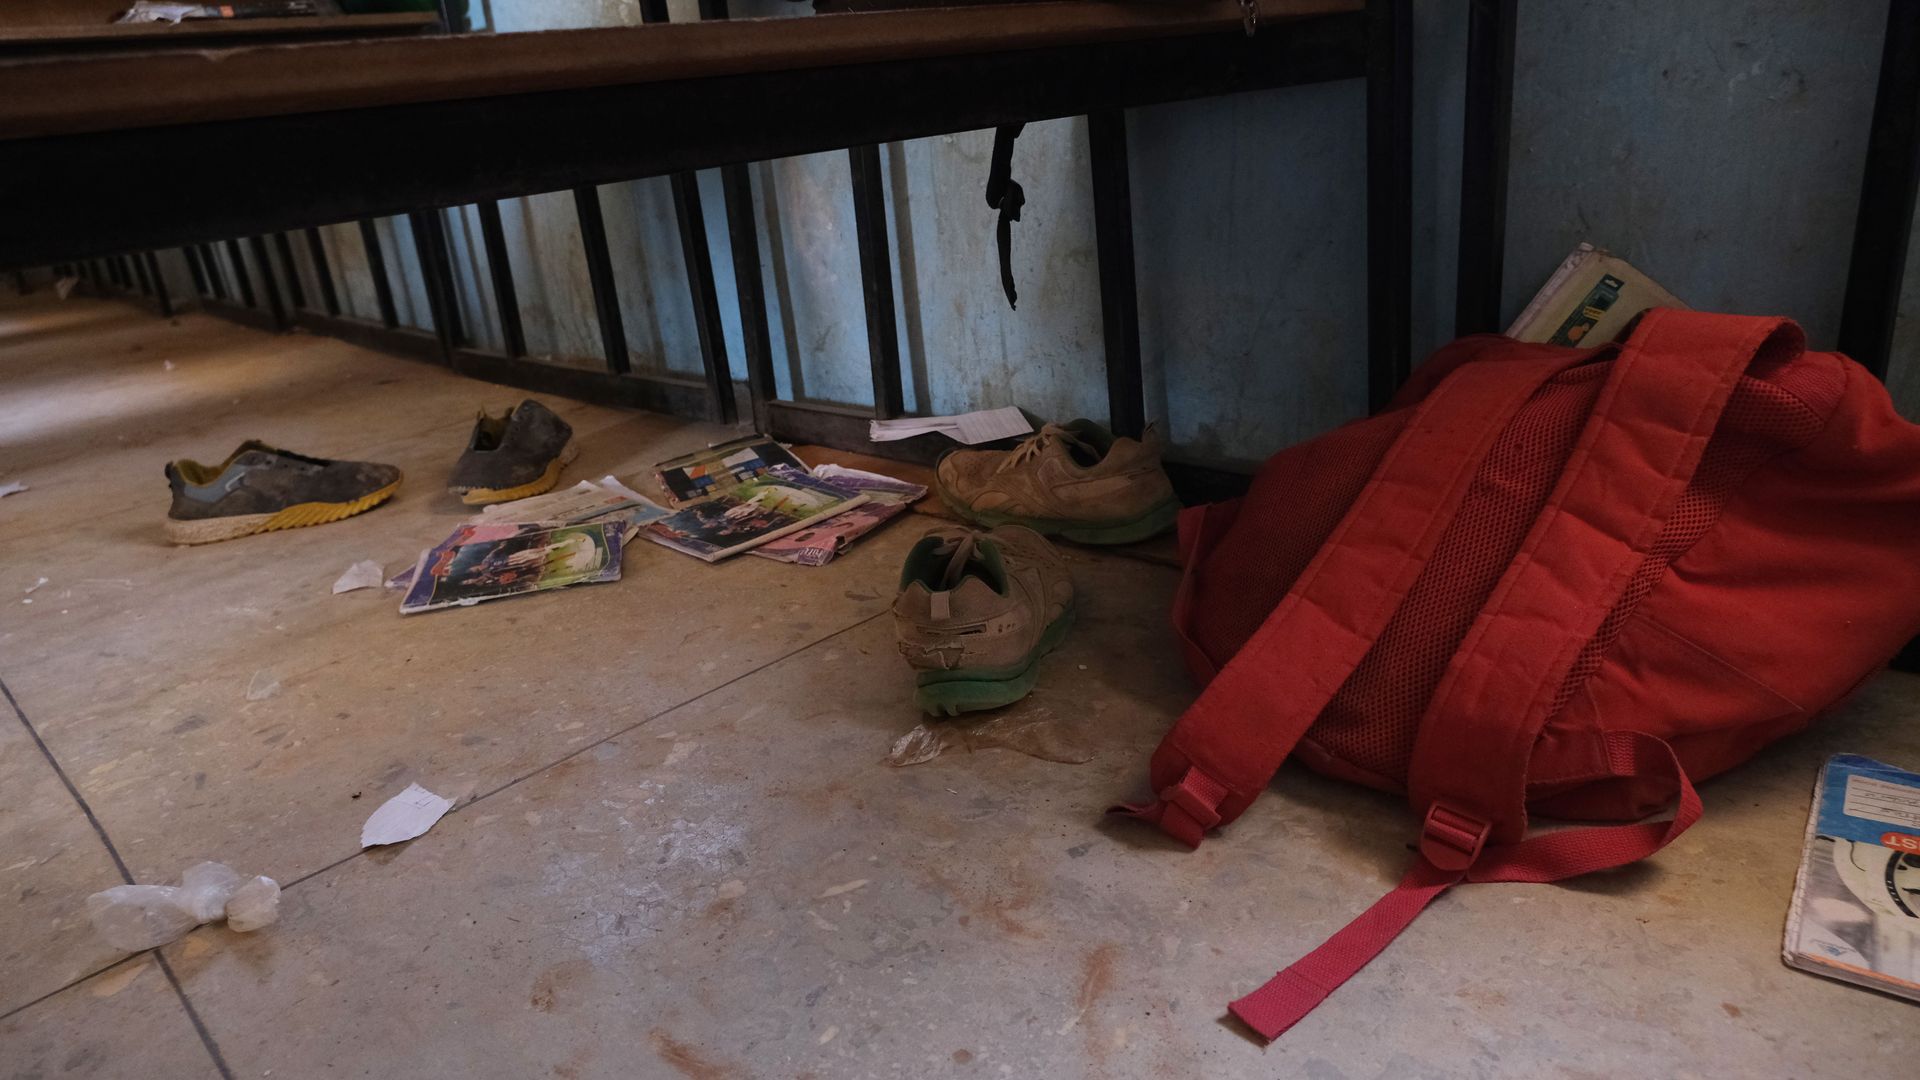 Picture of school bags and wares from the children who were abducted in Nigeria